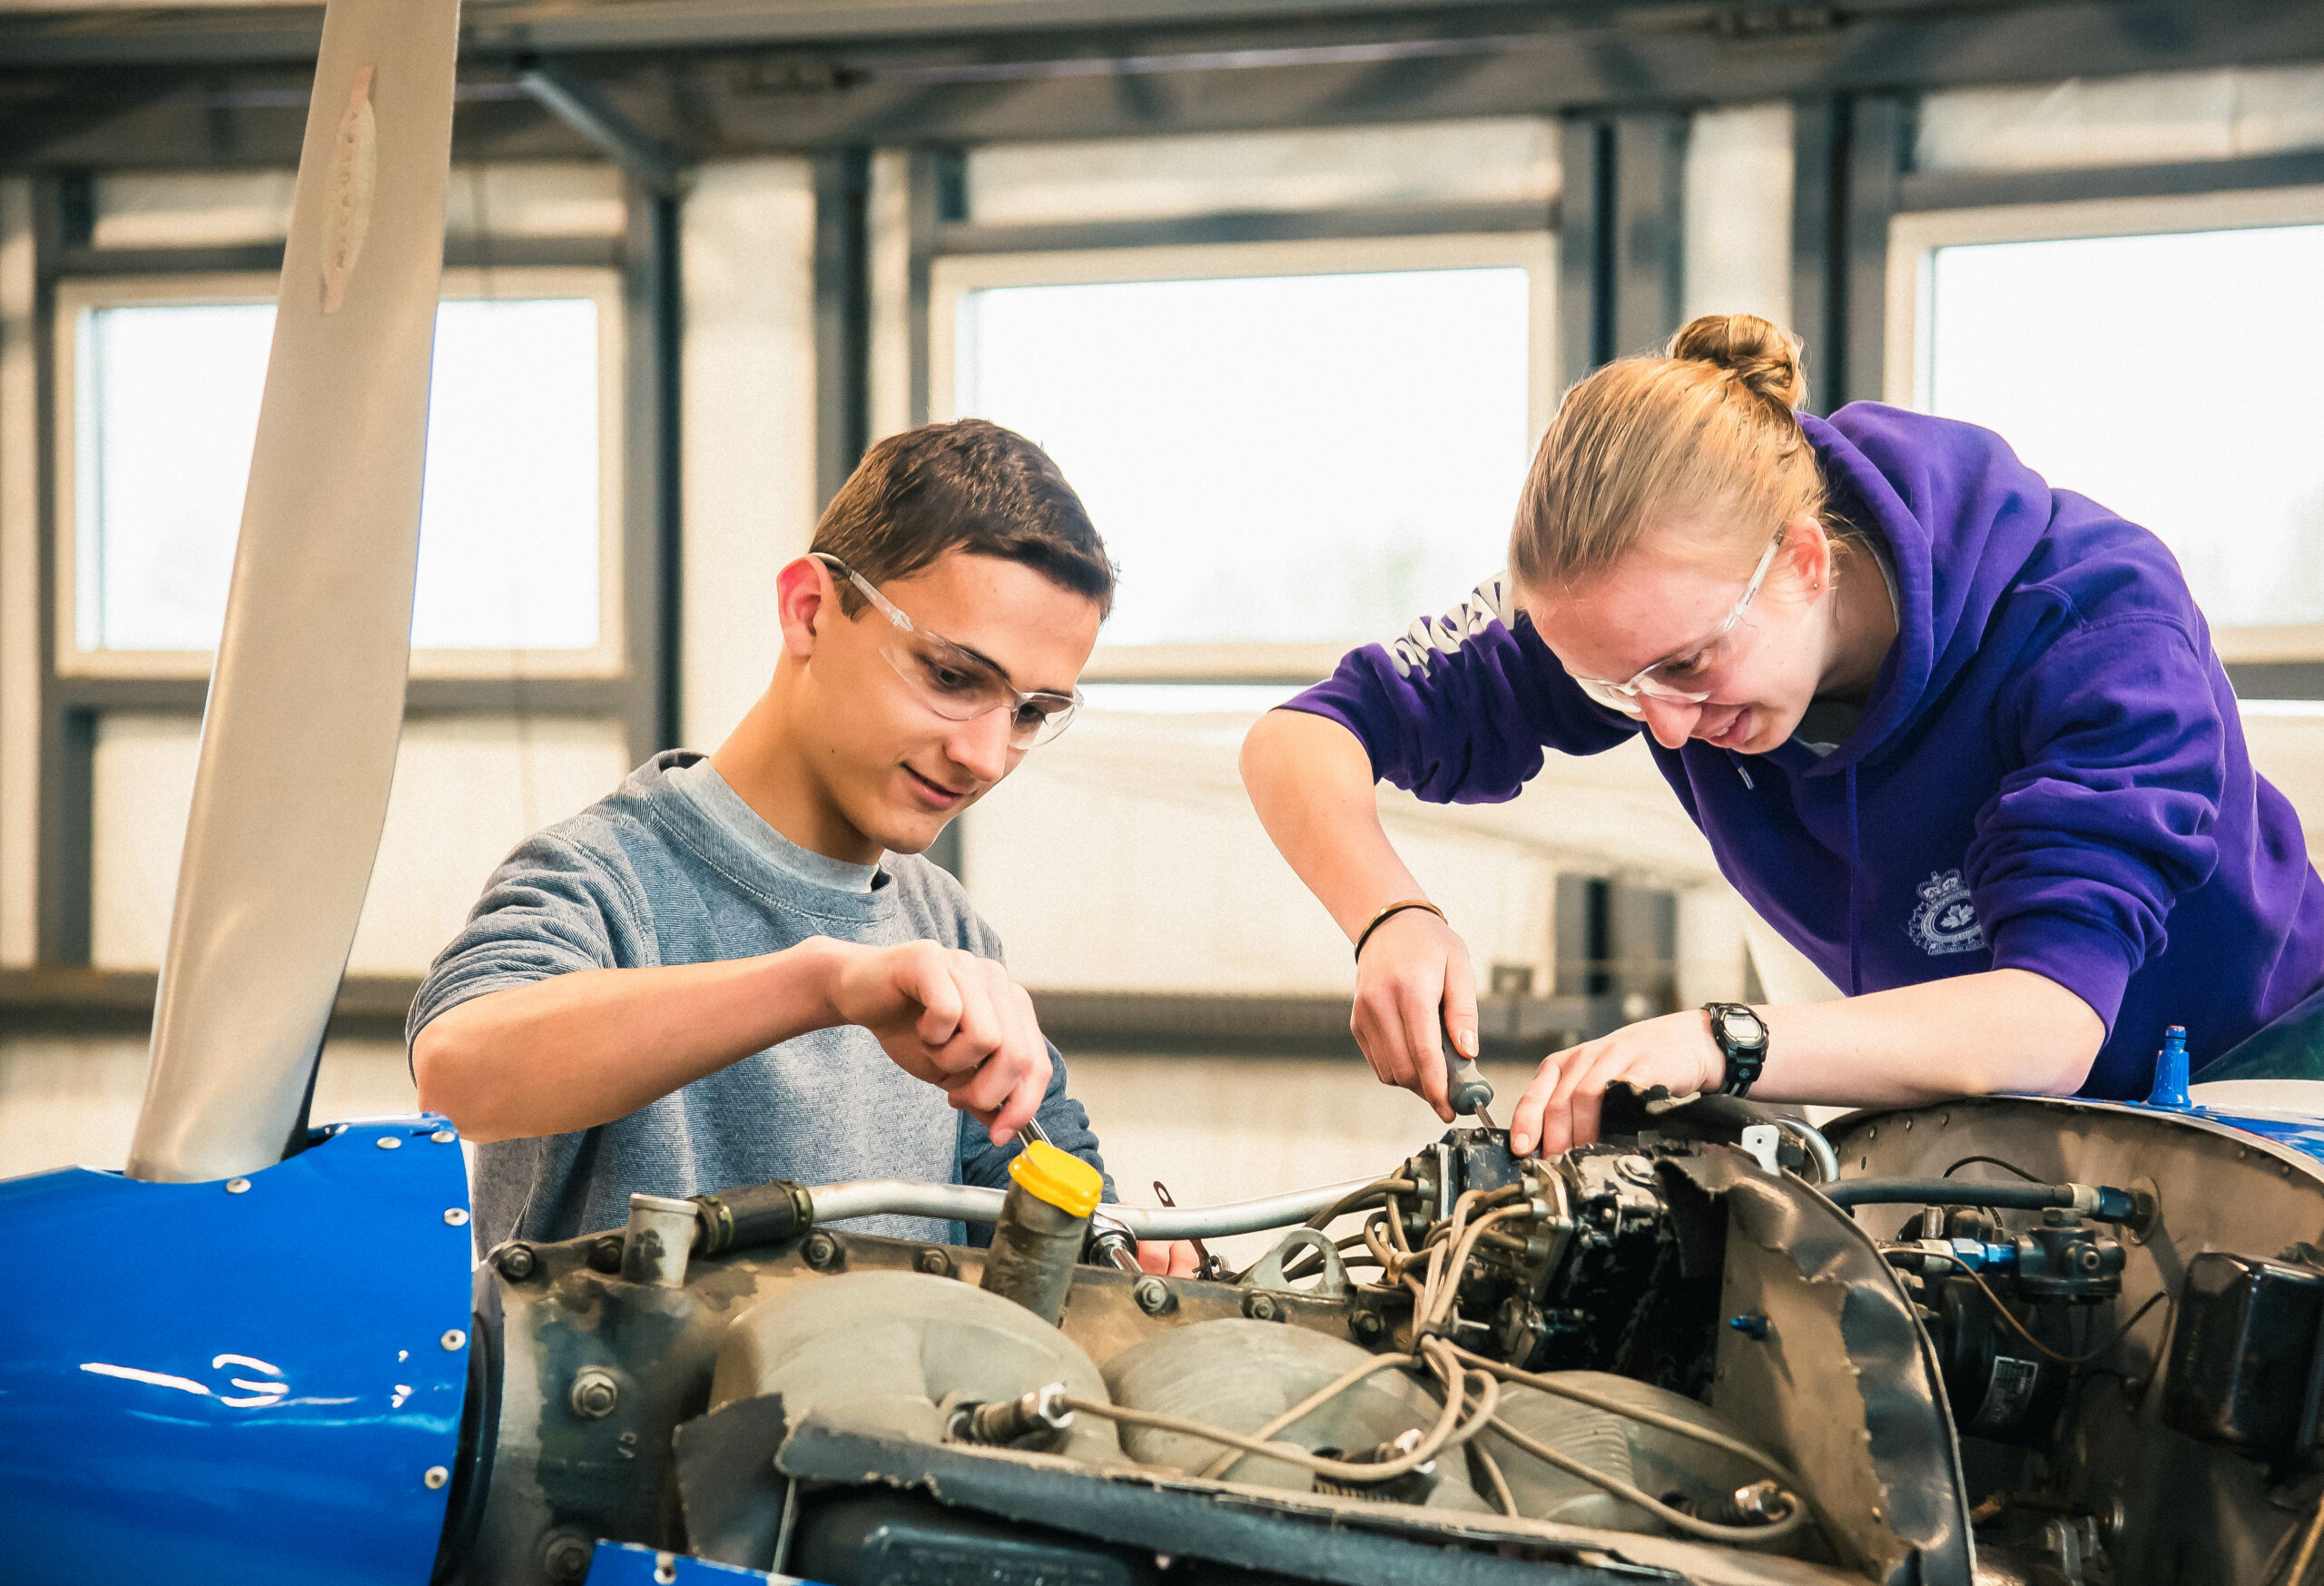 Male and female high school students using small tools to work on an airplane engine